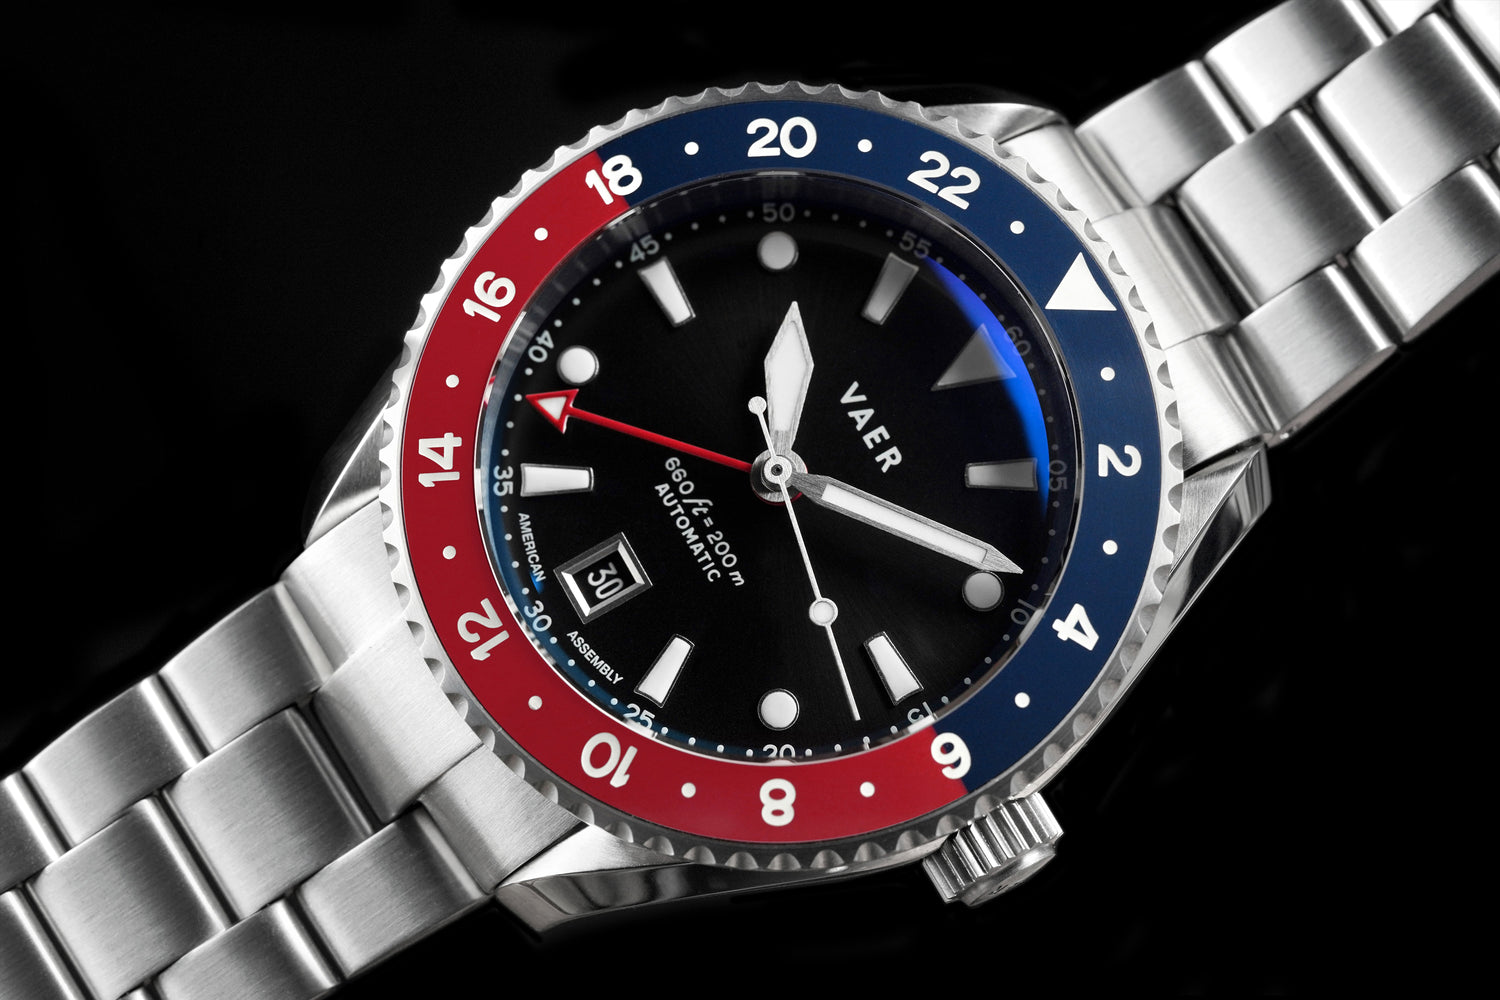 G5 Meridian USA GMT - Product Details and Operation Guide